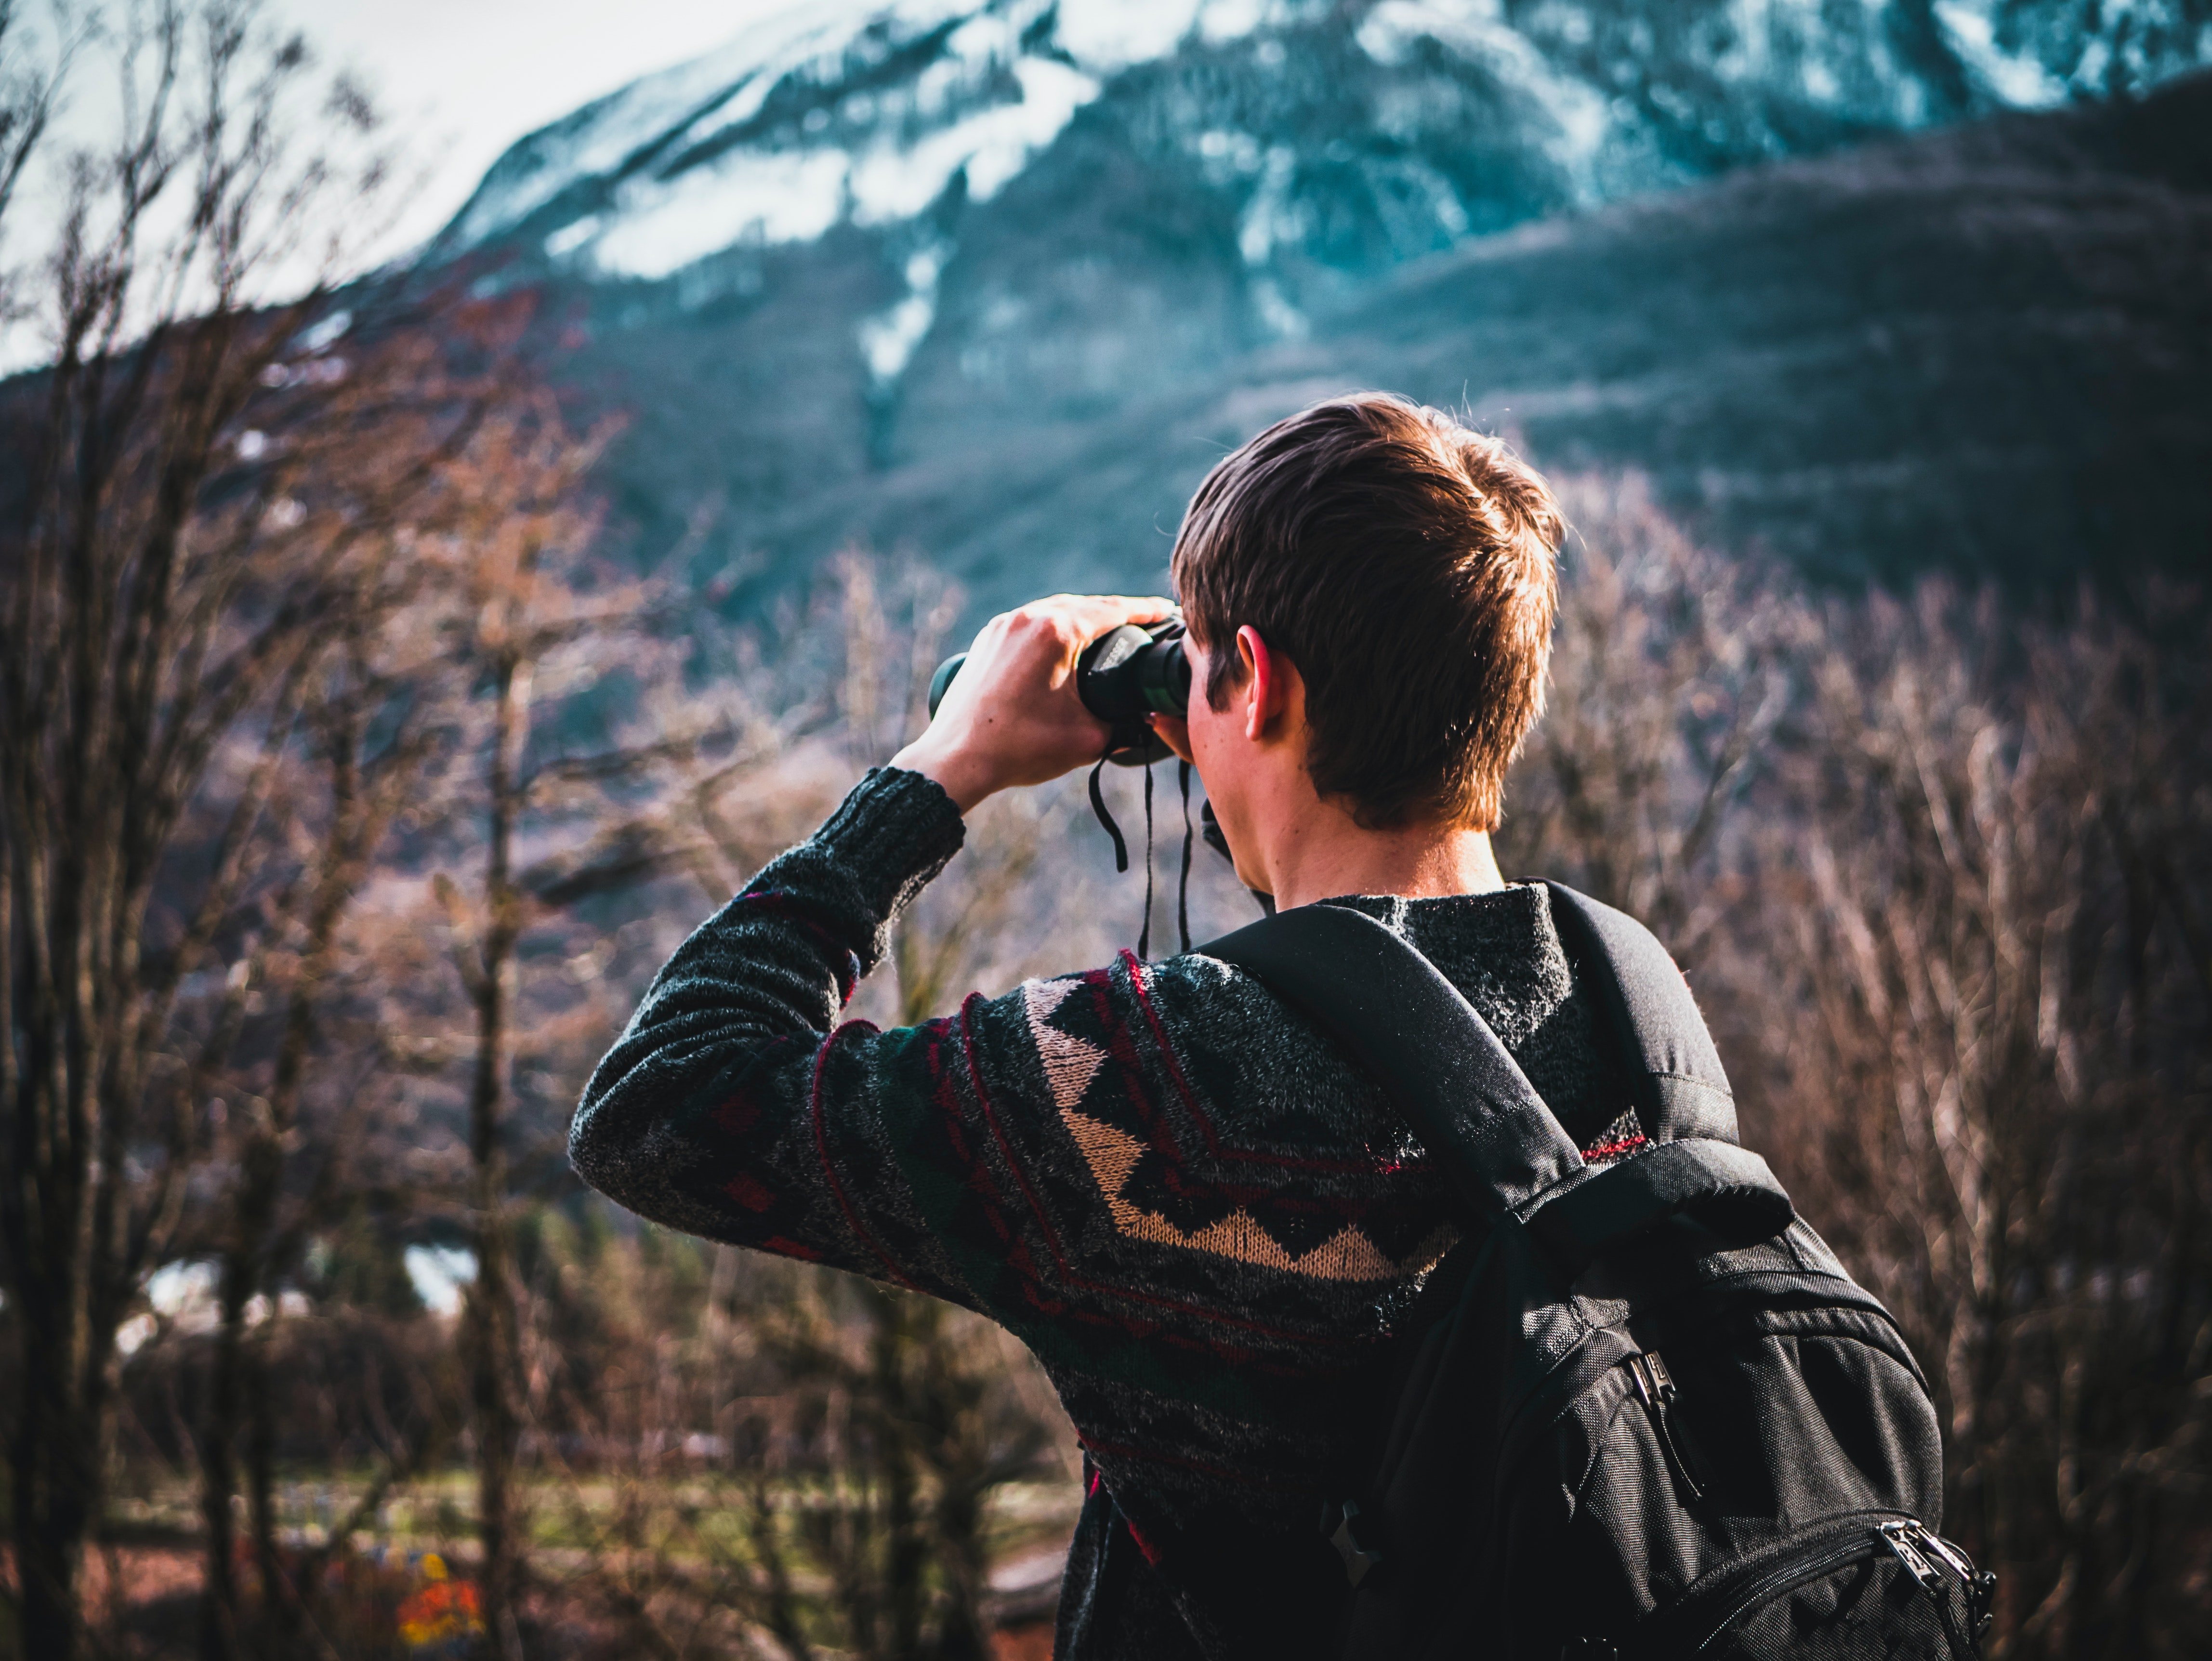 Pictured - A man using binoculars near a forest daytime | Source: Pexels 